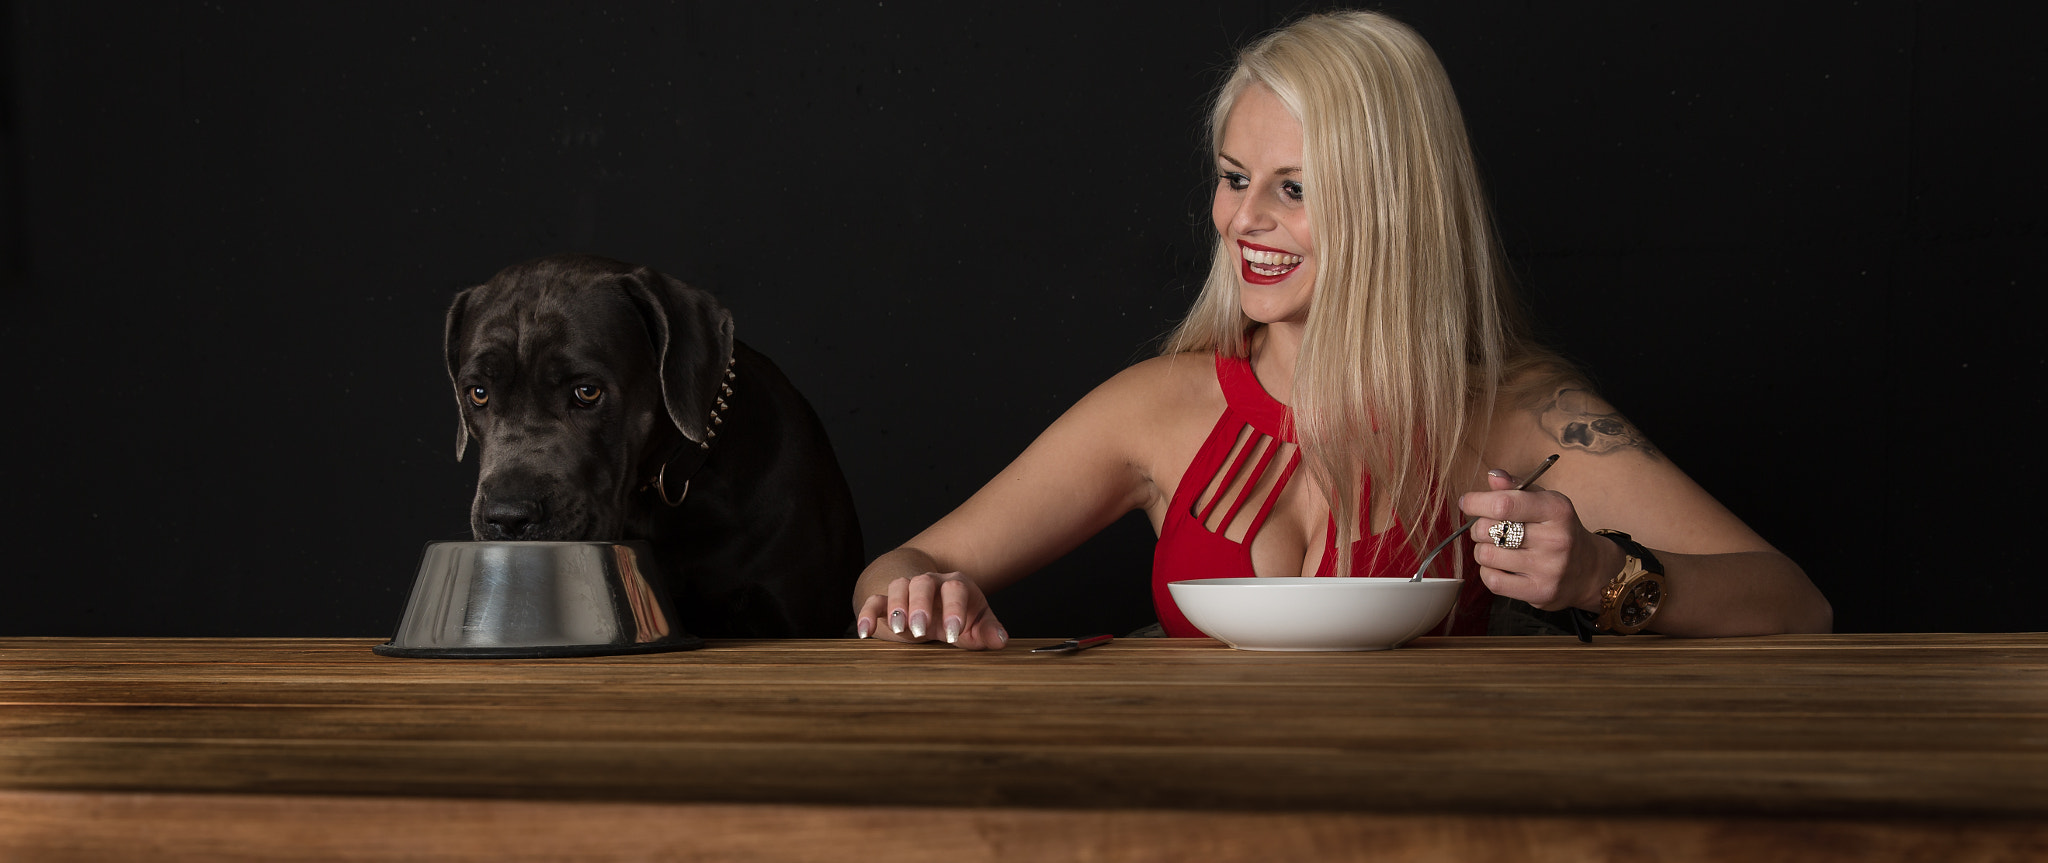 Women Food Blonde Dog Animals Model 500px Sacha Ruede Women With Dogs 2048x863